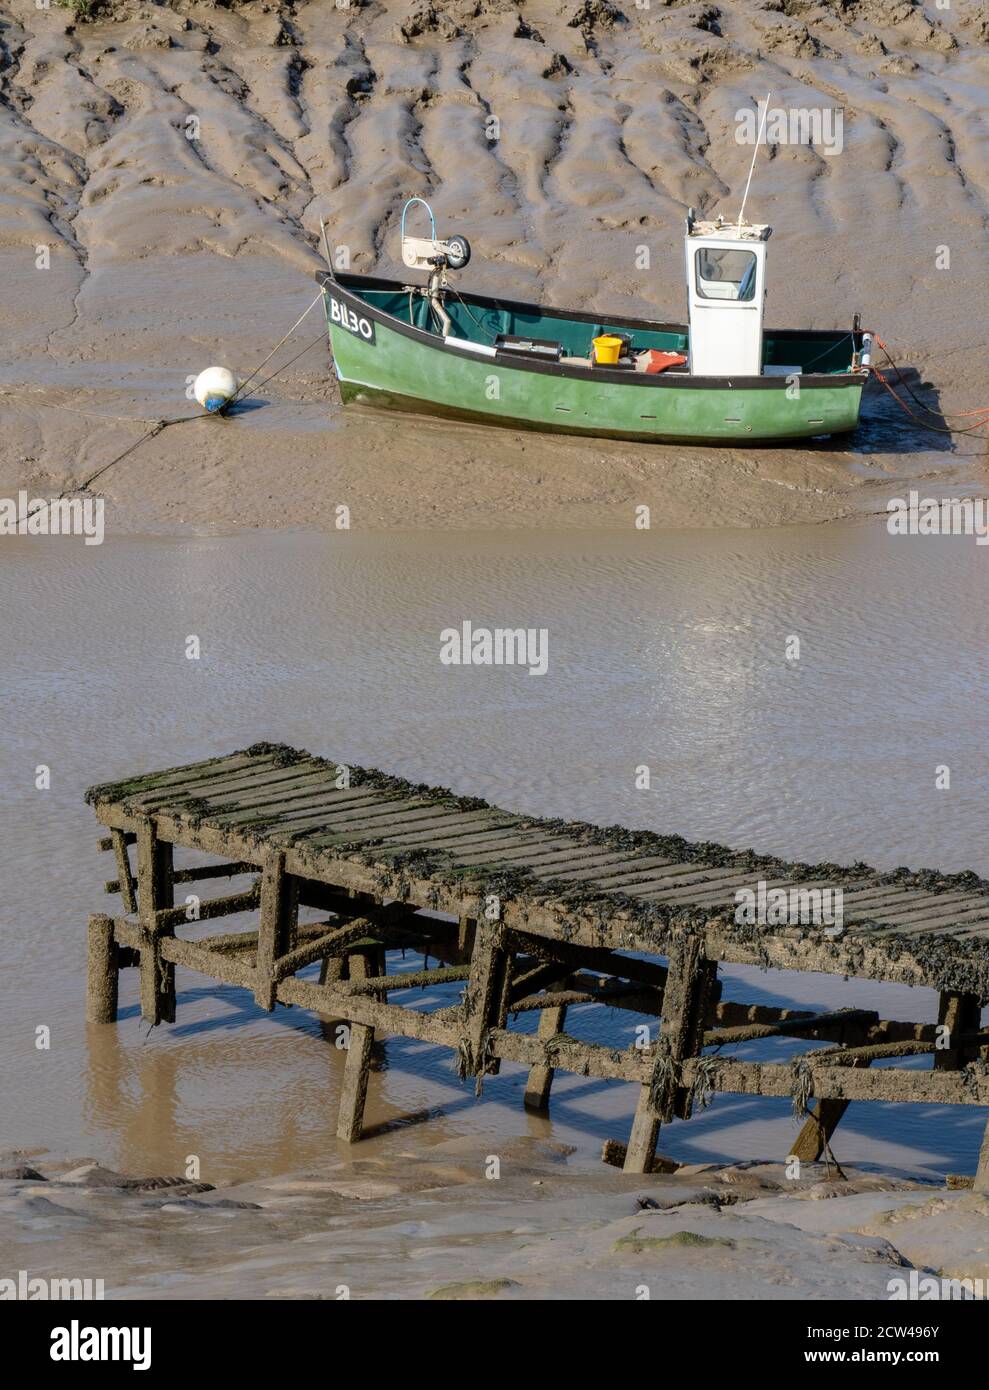 Pea green fishing boat moored on the muddy banks of the River Axe near Weston super Mare in Somerset UK Stock Photo